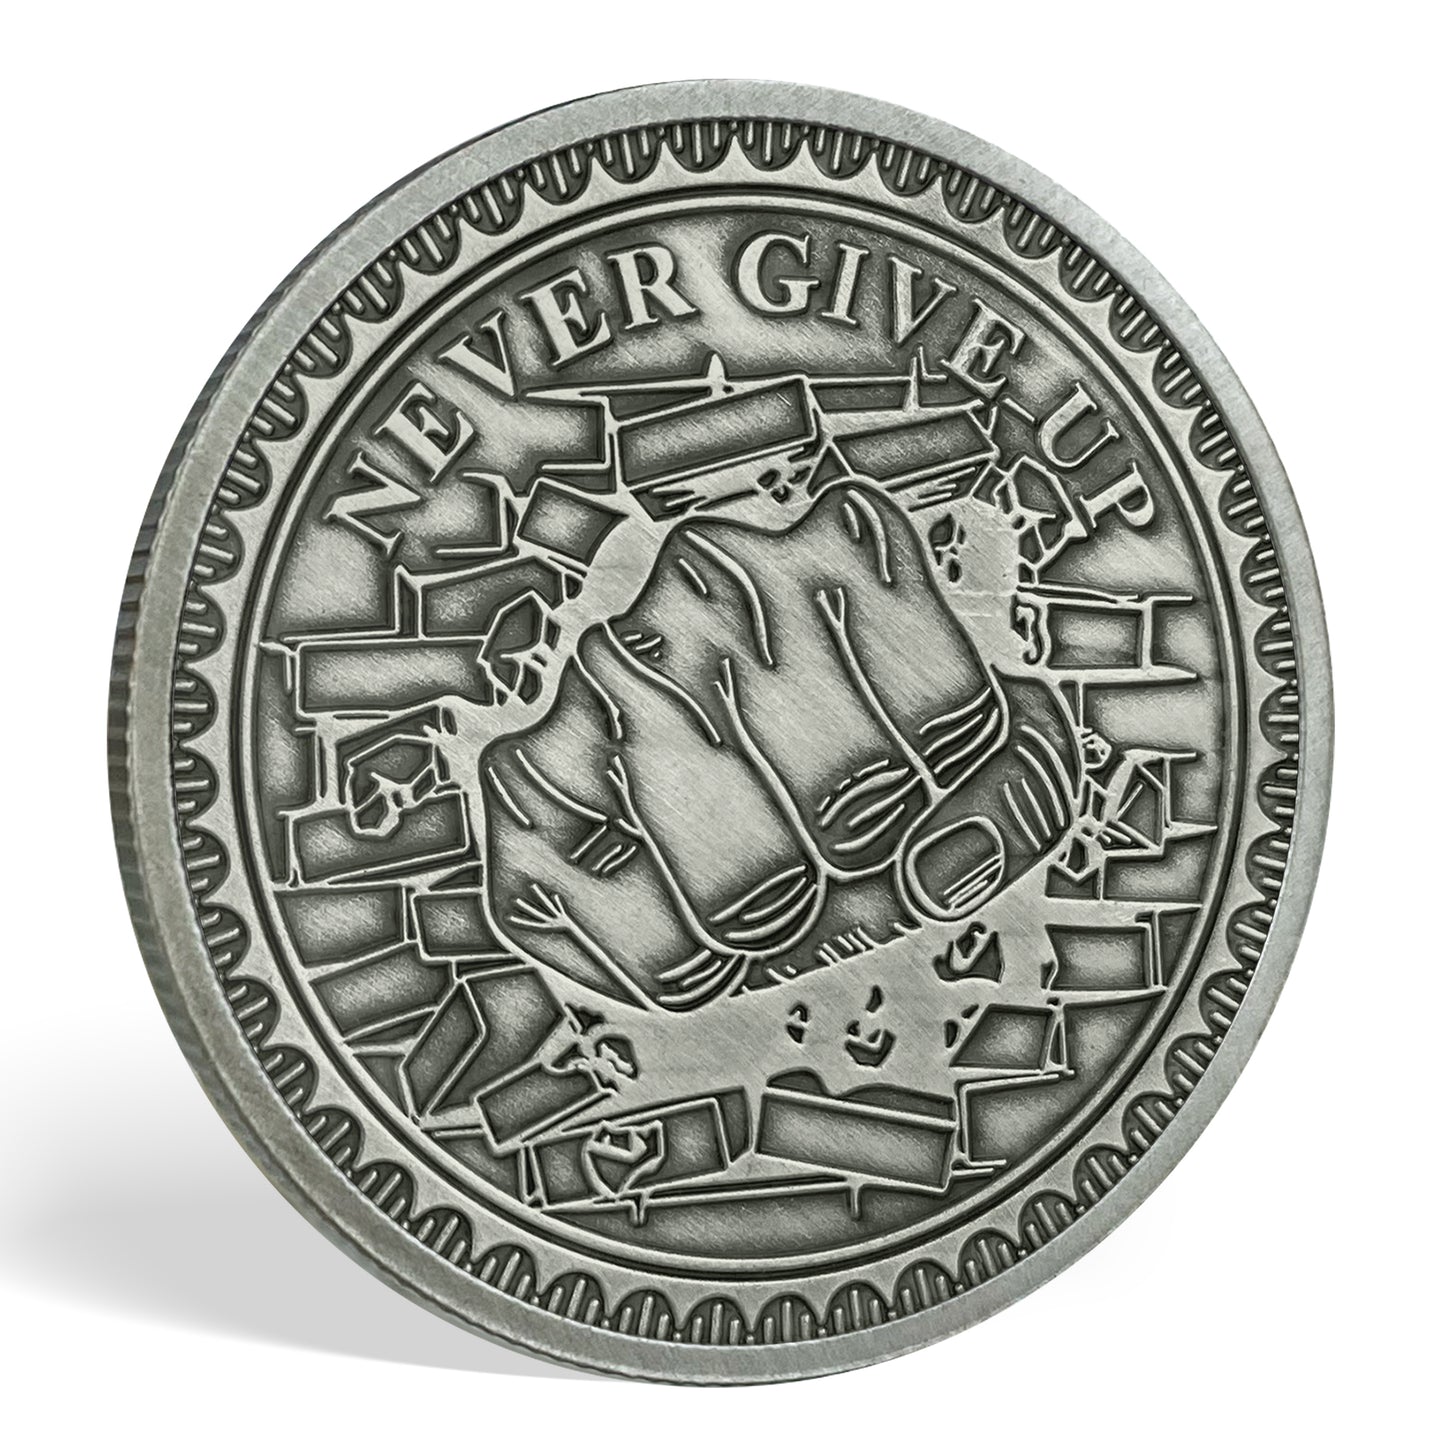 Never Give Up Encouragement Sobriety Coin Growth Gift AA Chips